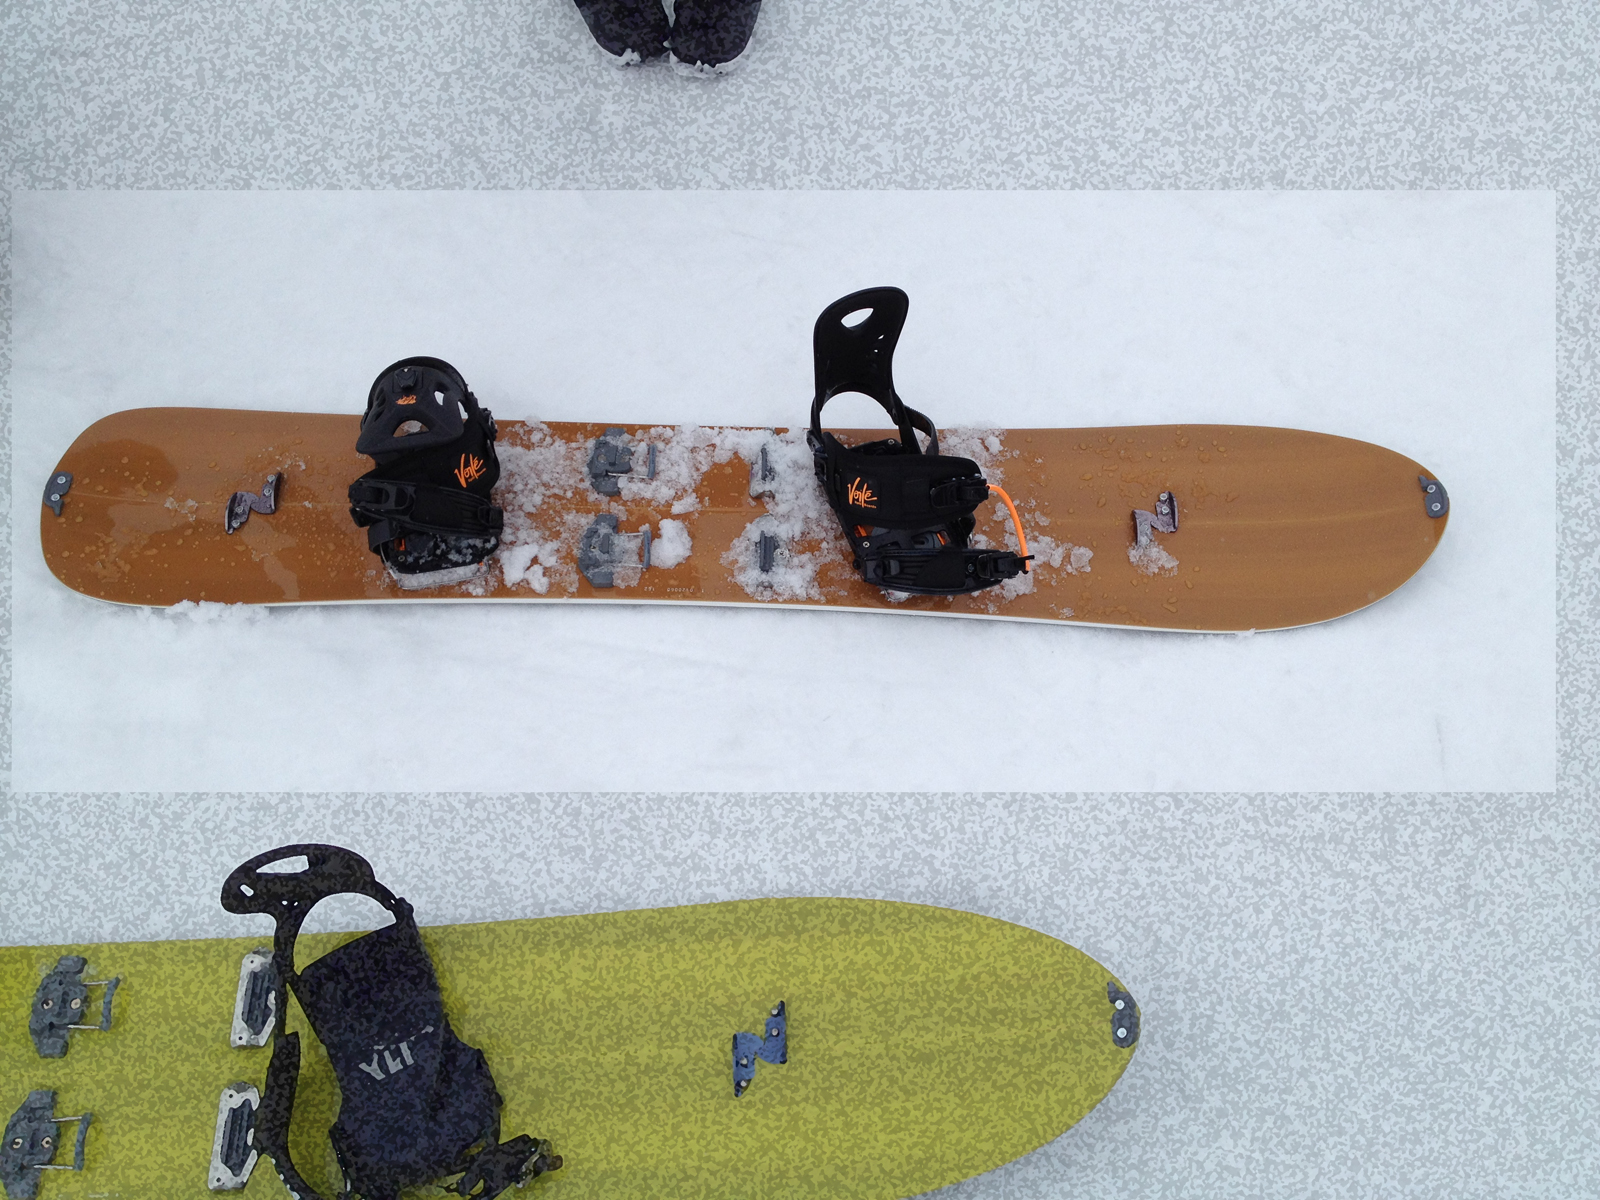 Blog by texi: GENTEMSTICK 2012-2013 来期モデル 試乗会 （& RIDERS SESSION）